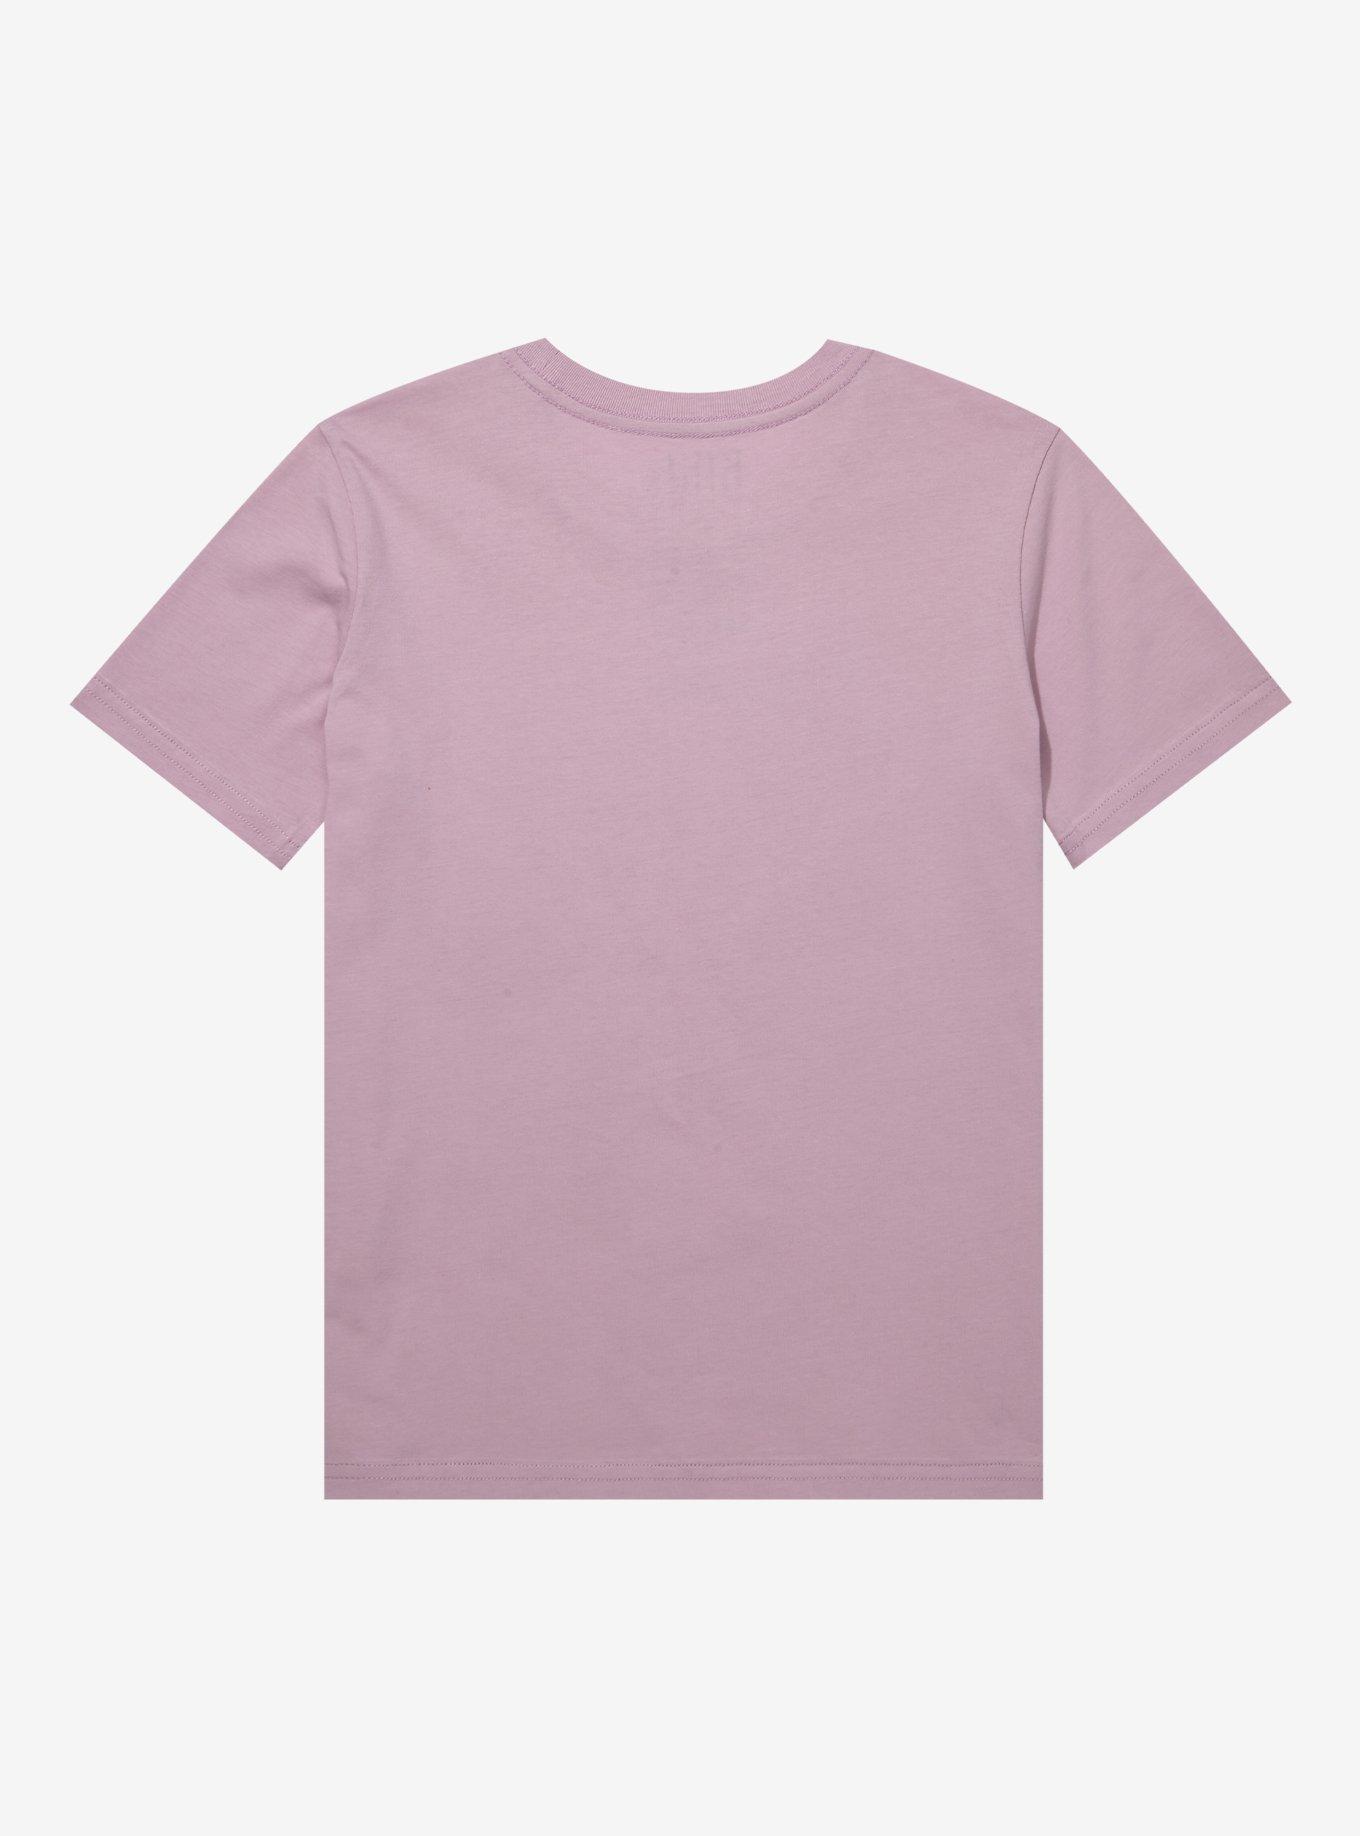 Our Universe Studio Ghibli Kiki’s Delivery Service Tonal Icons Youth T-Shirt - BoxLunch Exclusive, LILAC, alternate